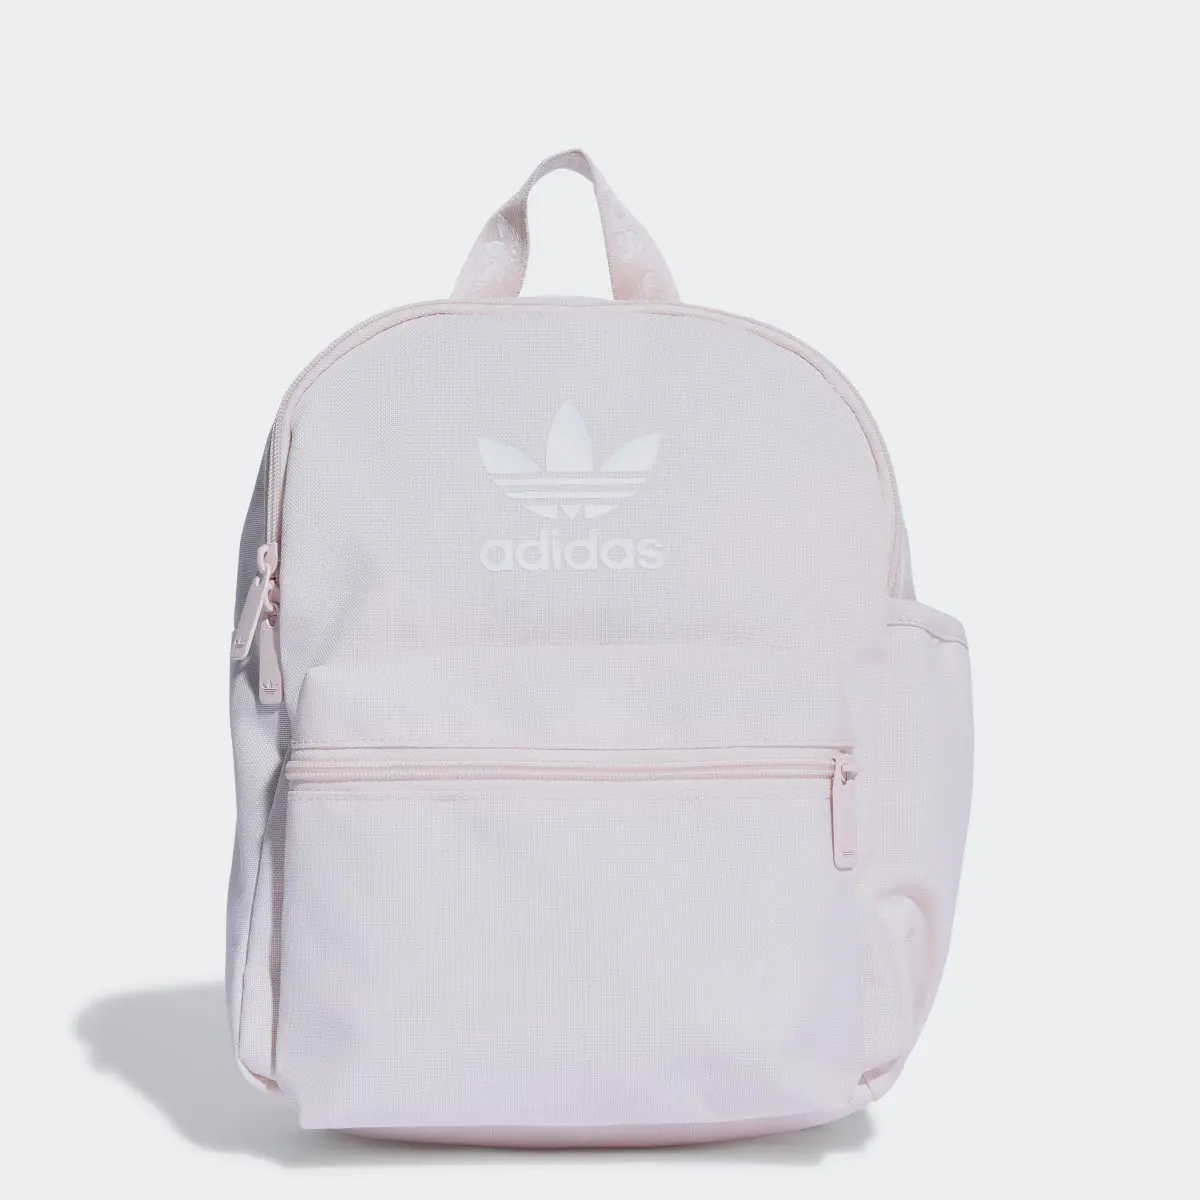 Adidas Adicolor Classic Backpack Small. 1